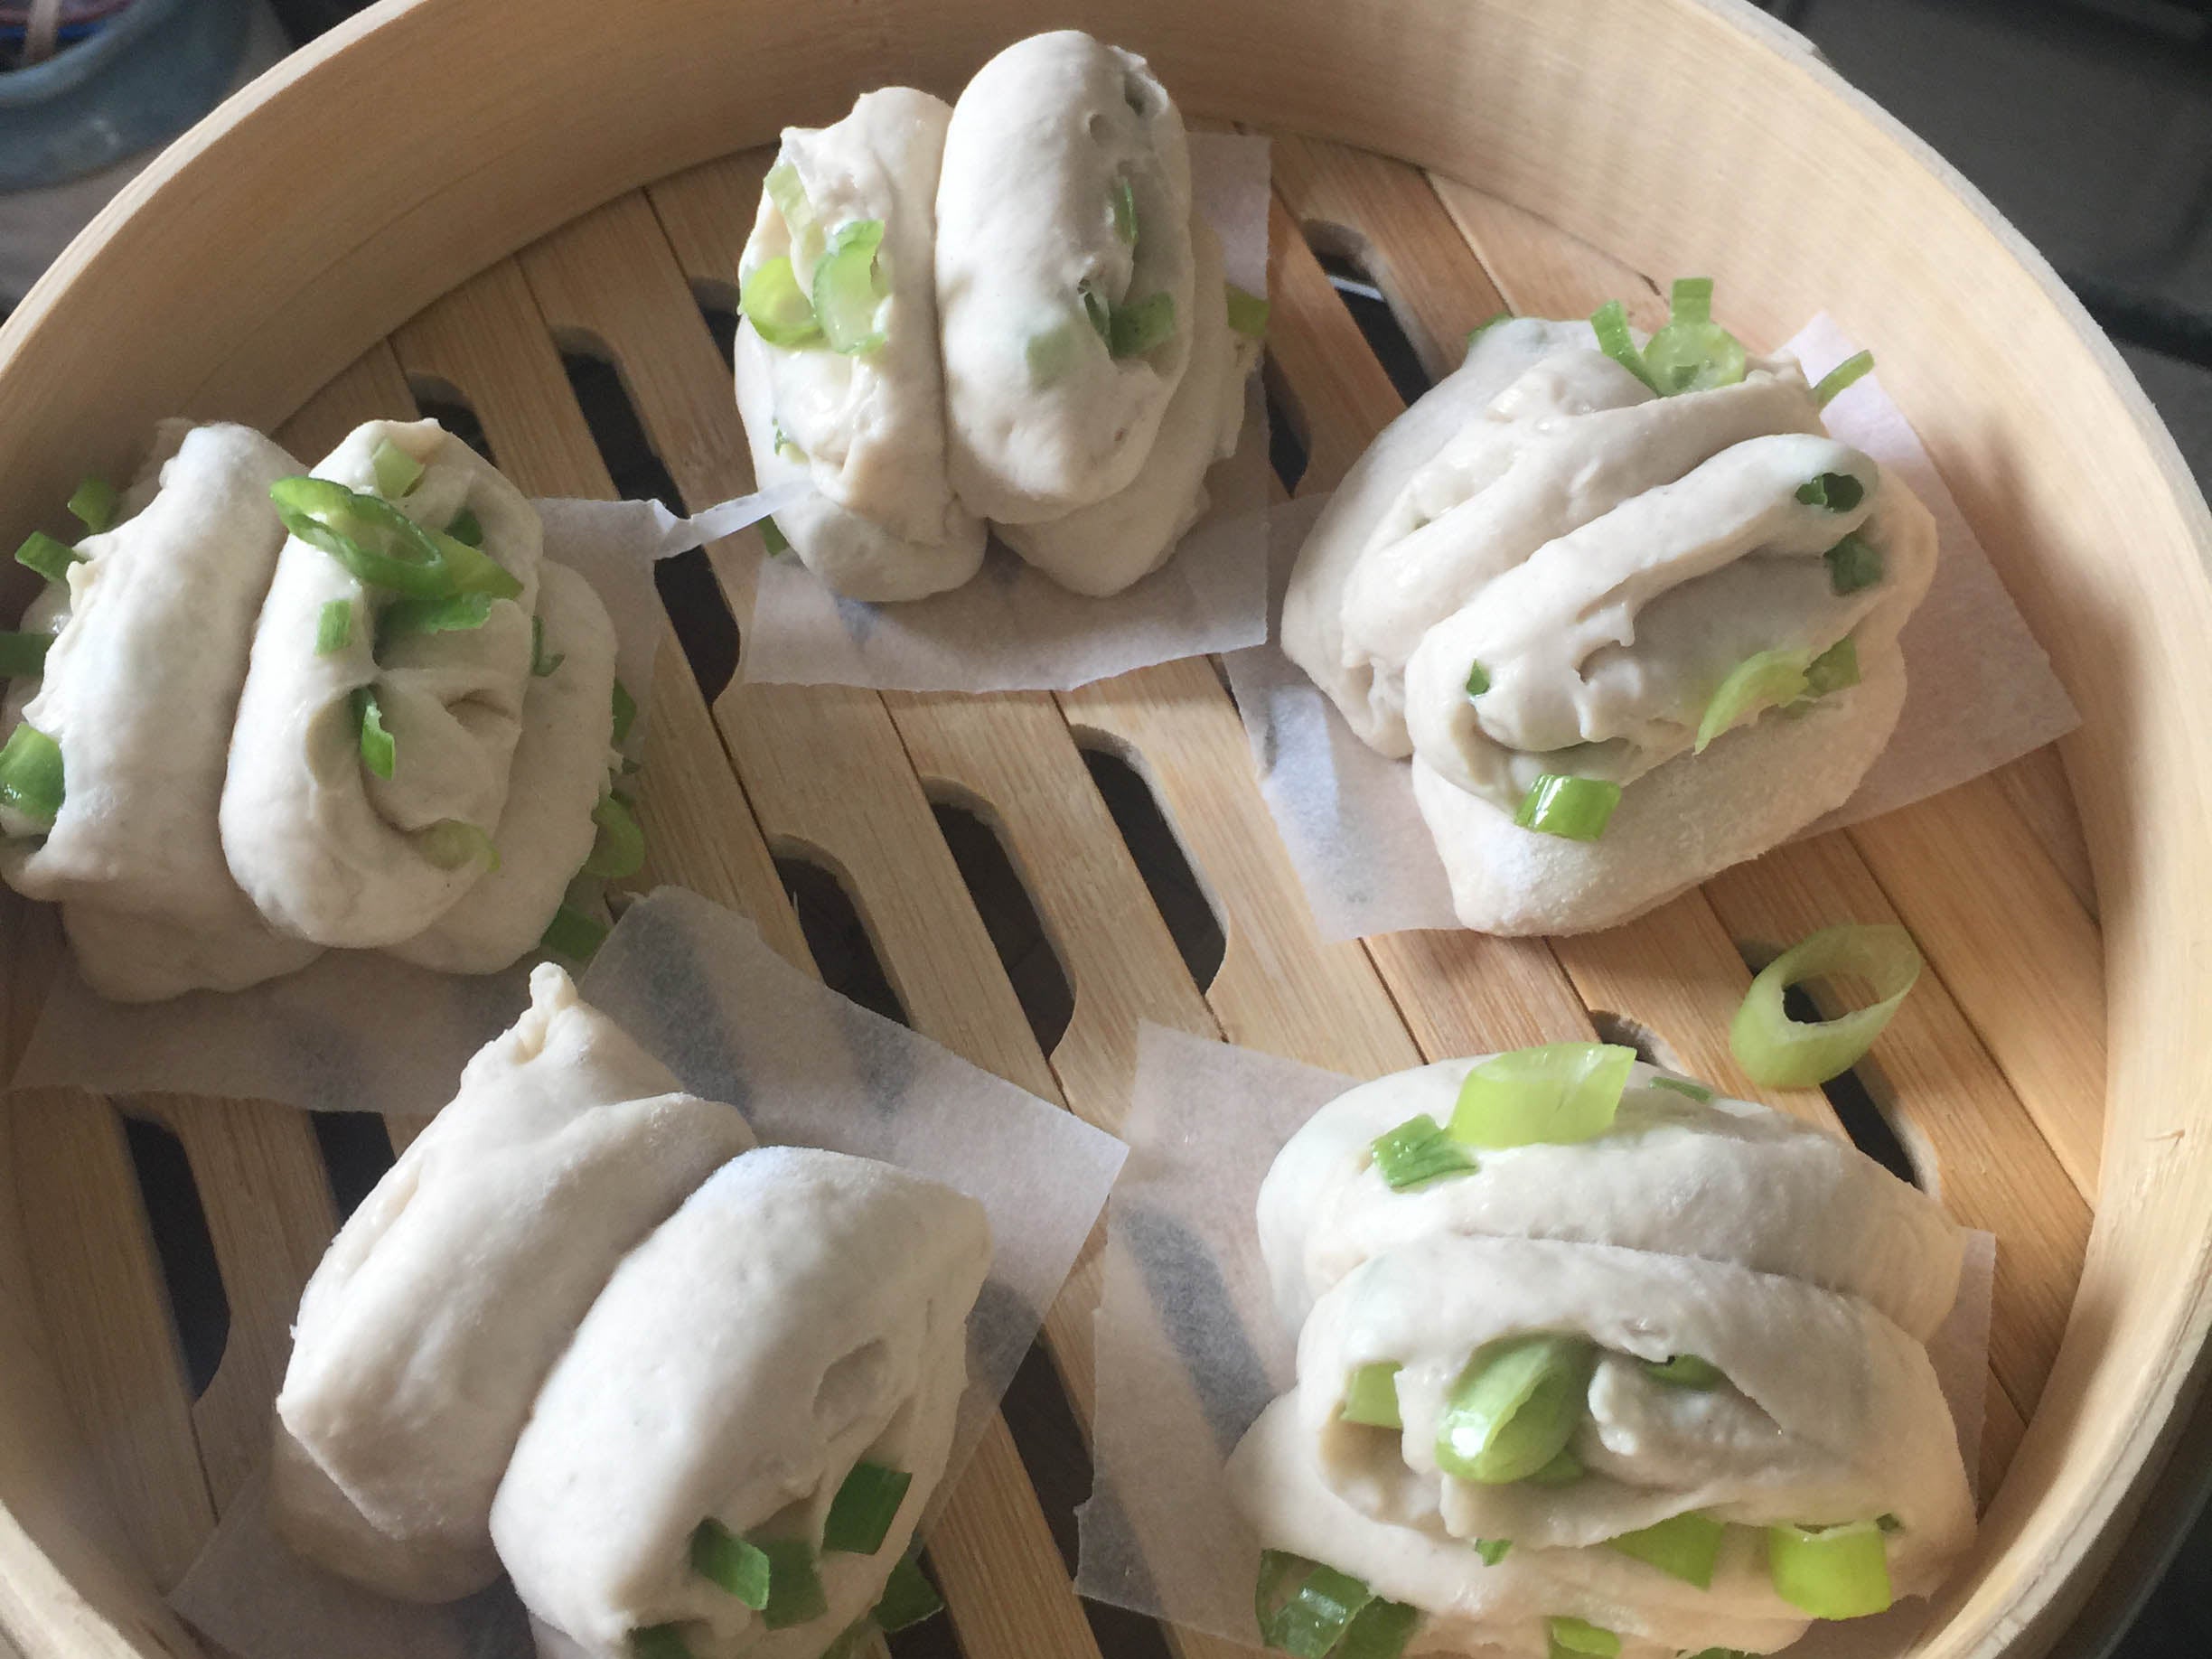 For a long time, Kate shopped exclusively at online Asian supermarkets to get ingredients to make dishes like these Chinese flower buns